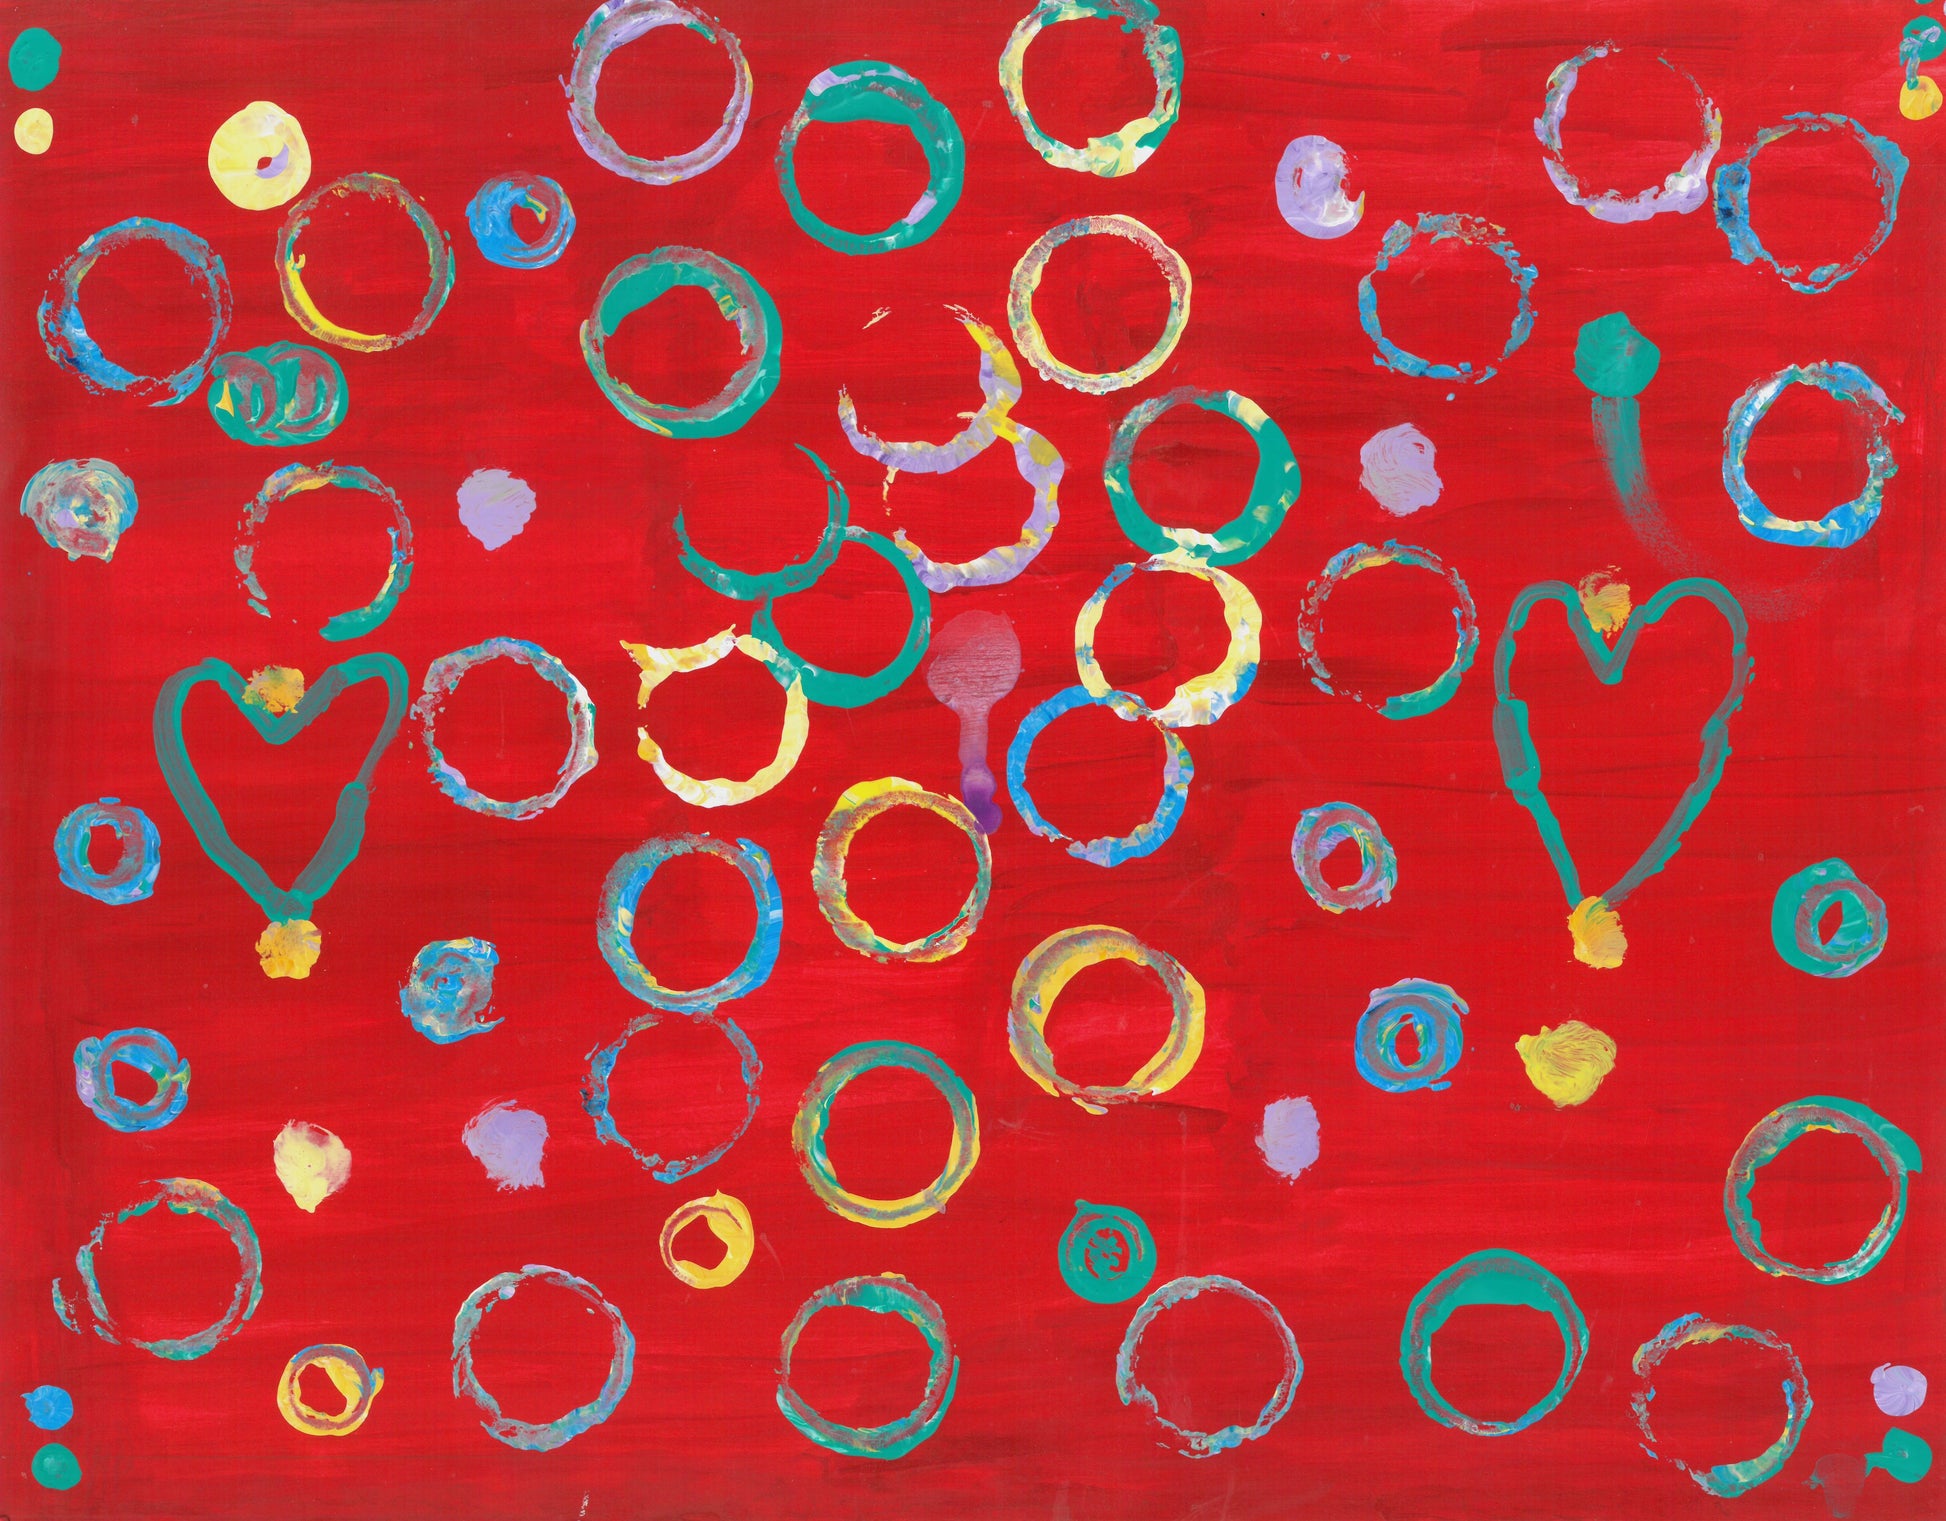 This is a painting with a red background. It has several blue, pink, and yellow circles and two green hearts